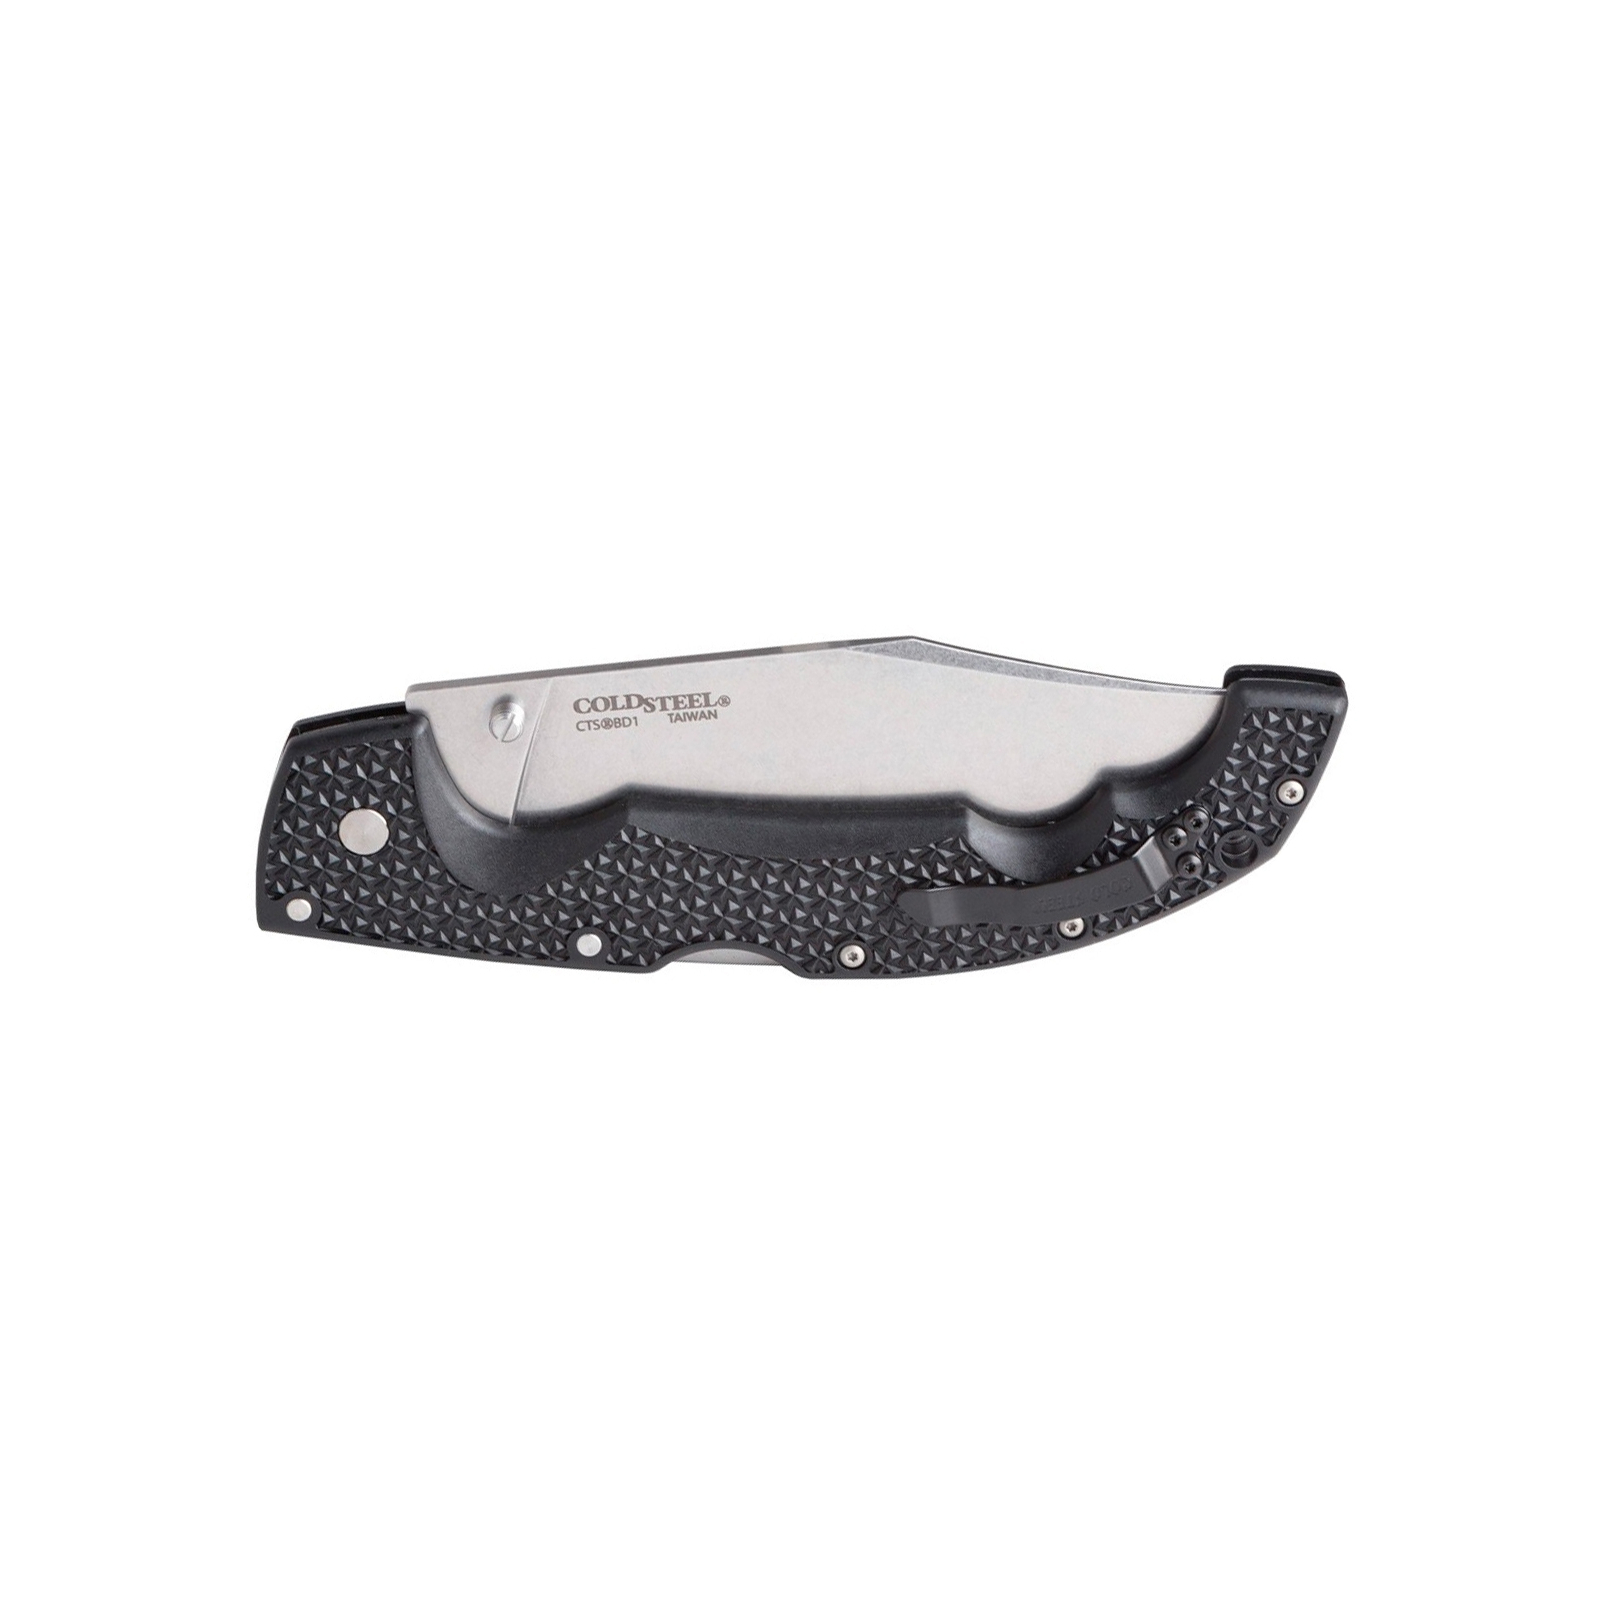 Нож Cold Steel Voyager XL Clip Point Serrated (29TXCCS) изображение 2